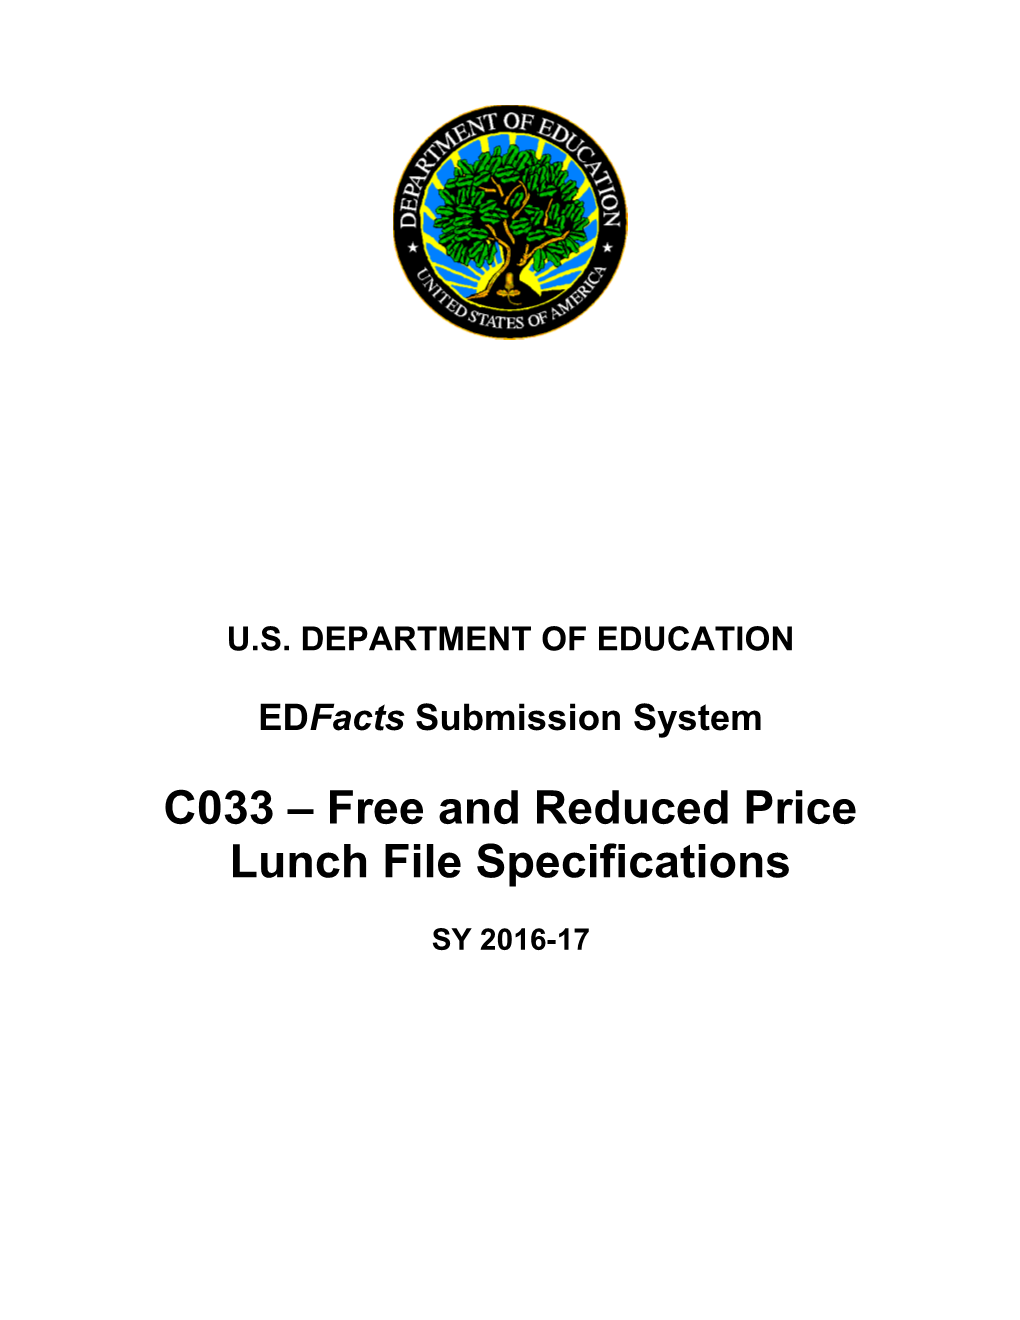 Free Reduced Price Lunch File Specifications (Msword)